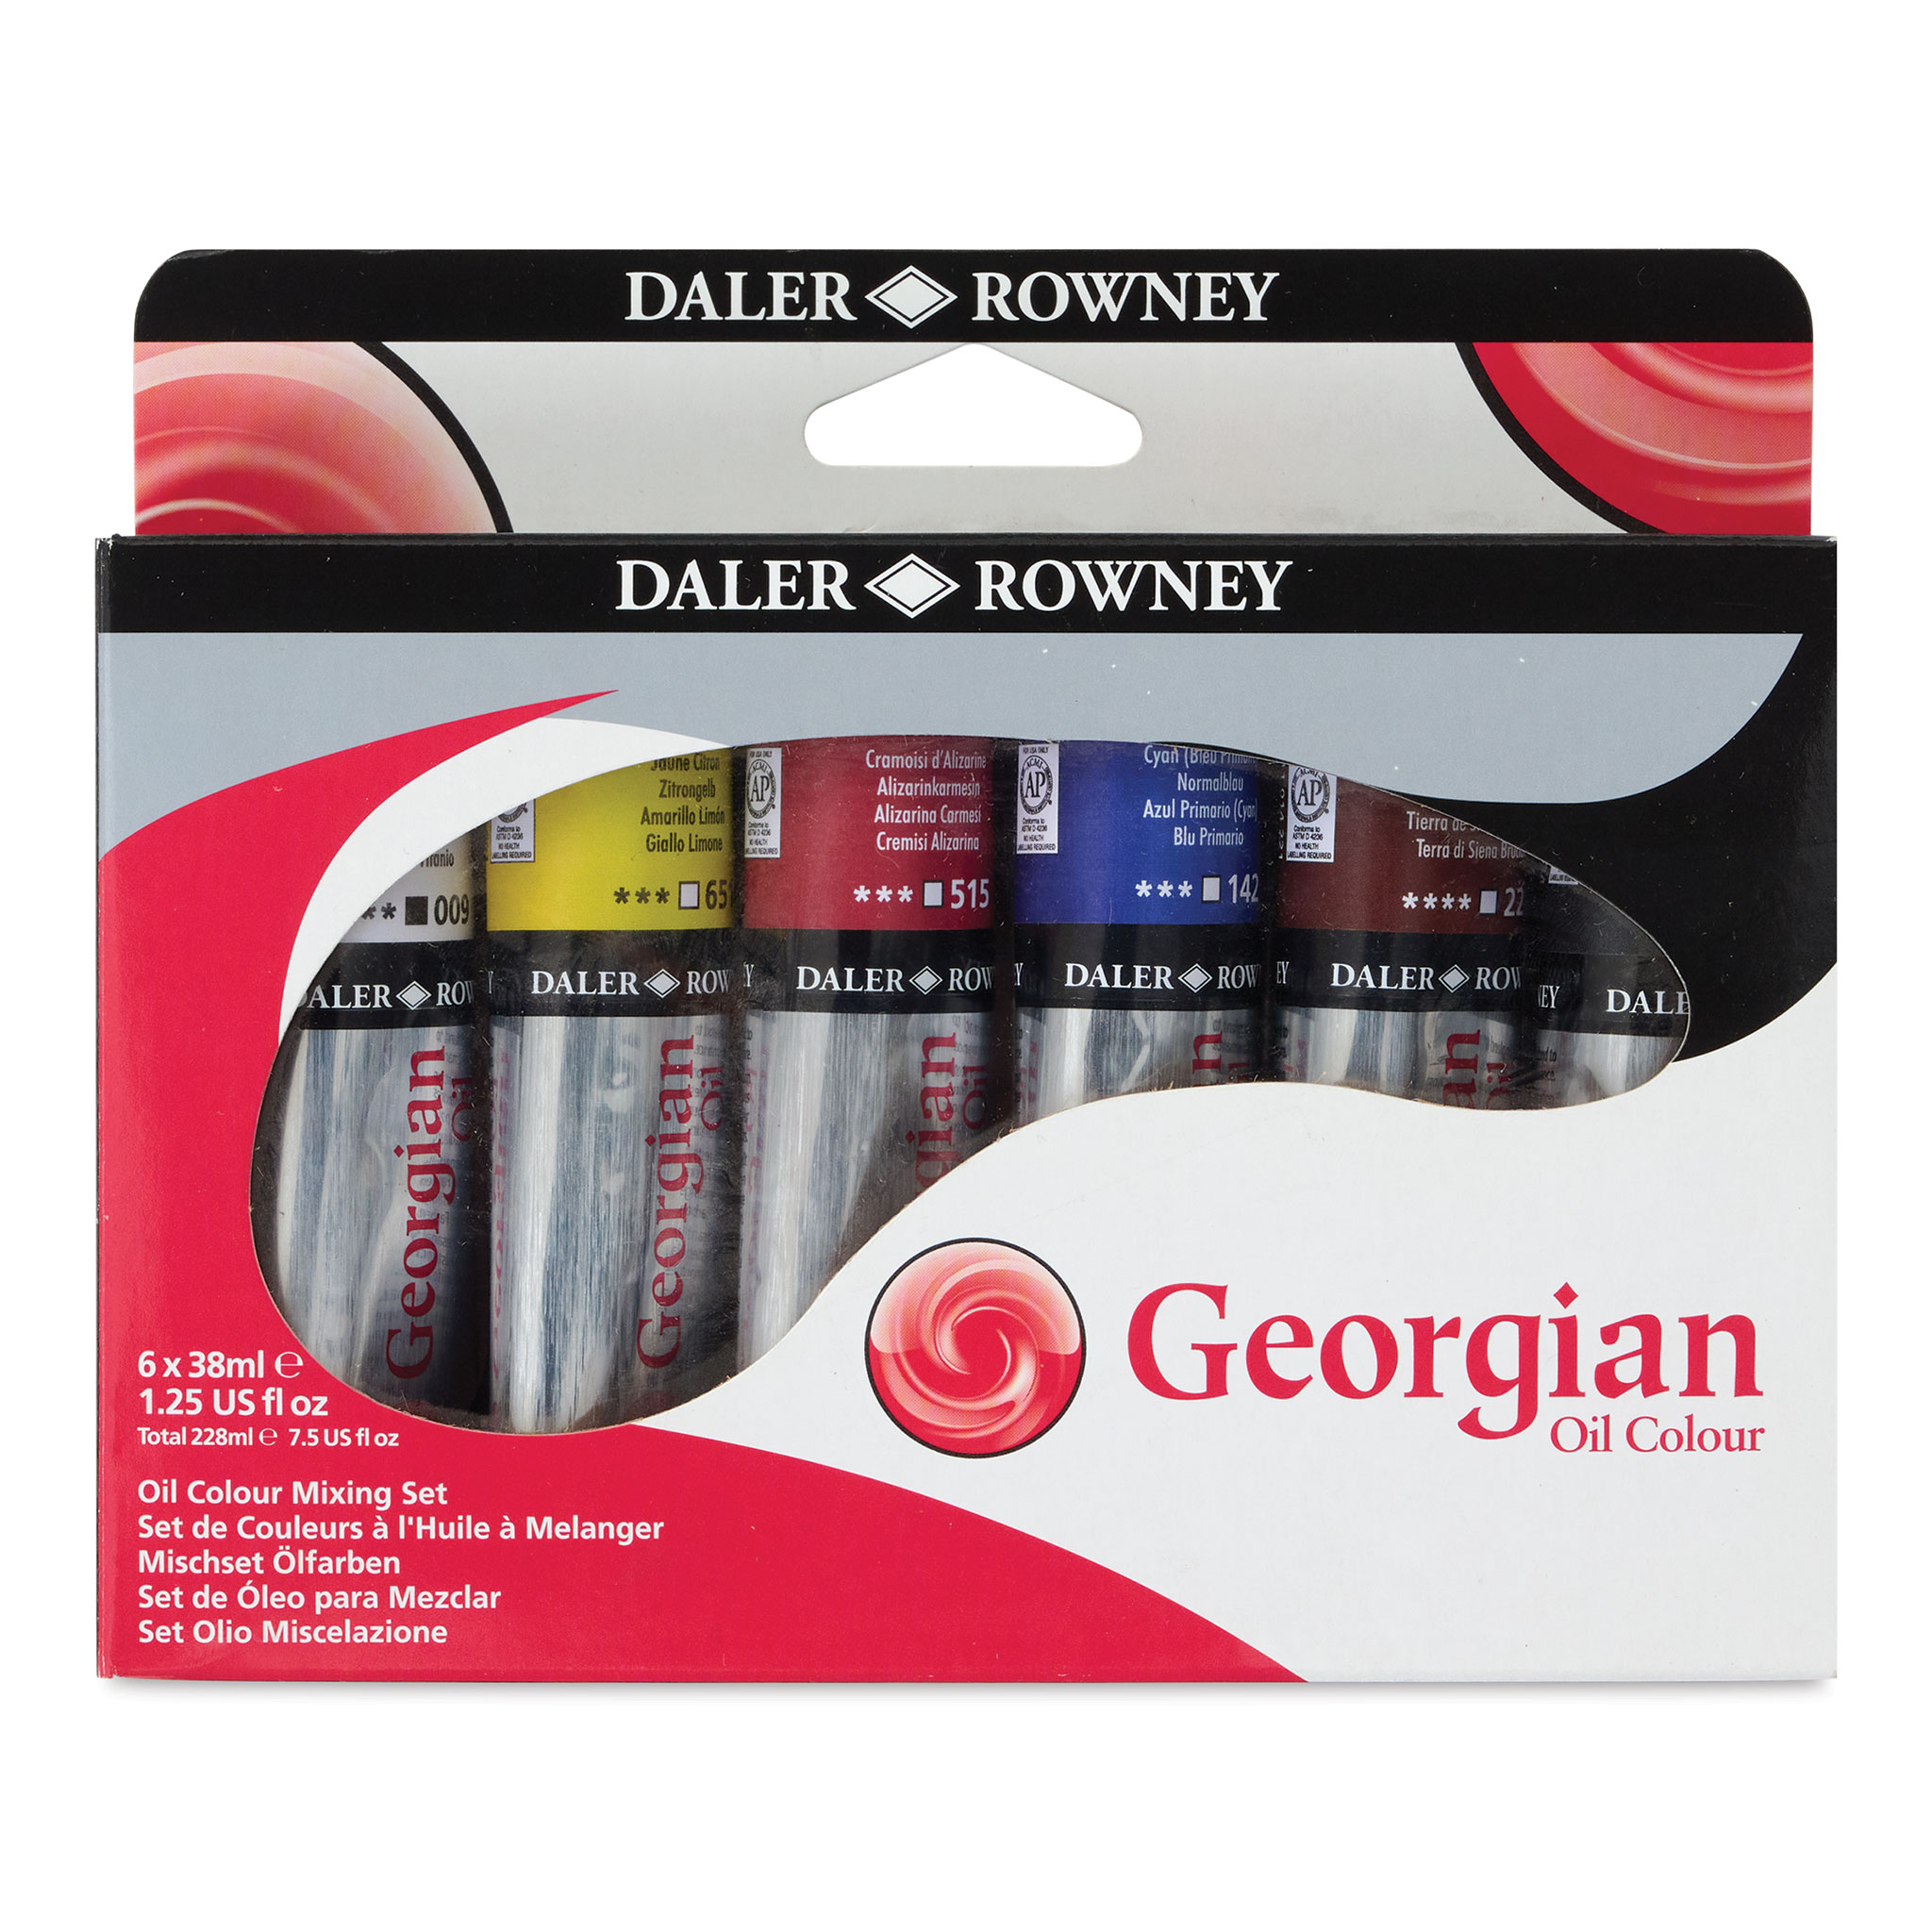  Daler Rowney Georgian Oil Paint Titanium White 38ml Tube - Art  Paints for Canvas Paper and More - Oil Painting Supplies for Artists and  Students - Artist Oil Paint for Any